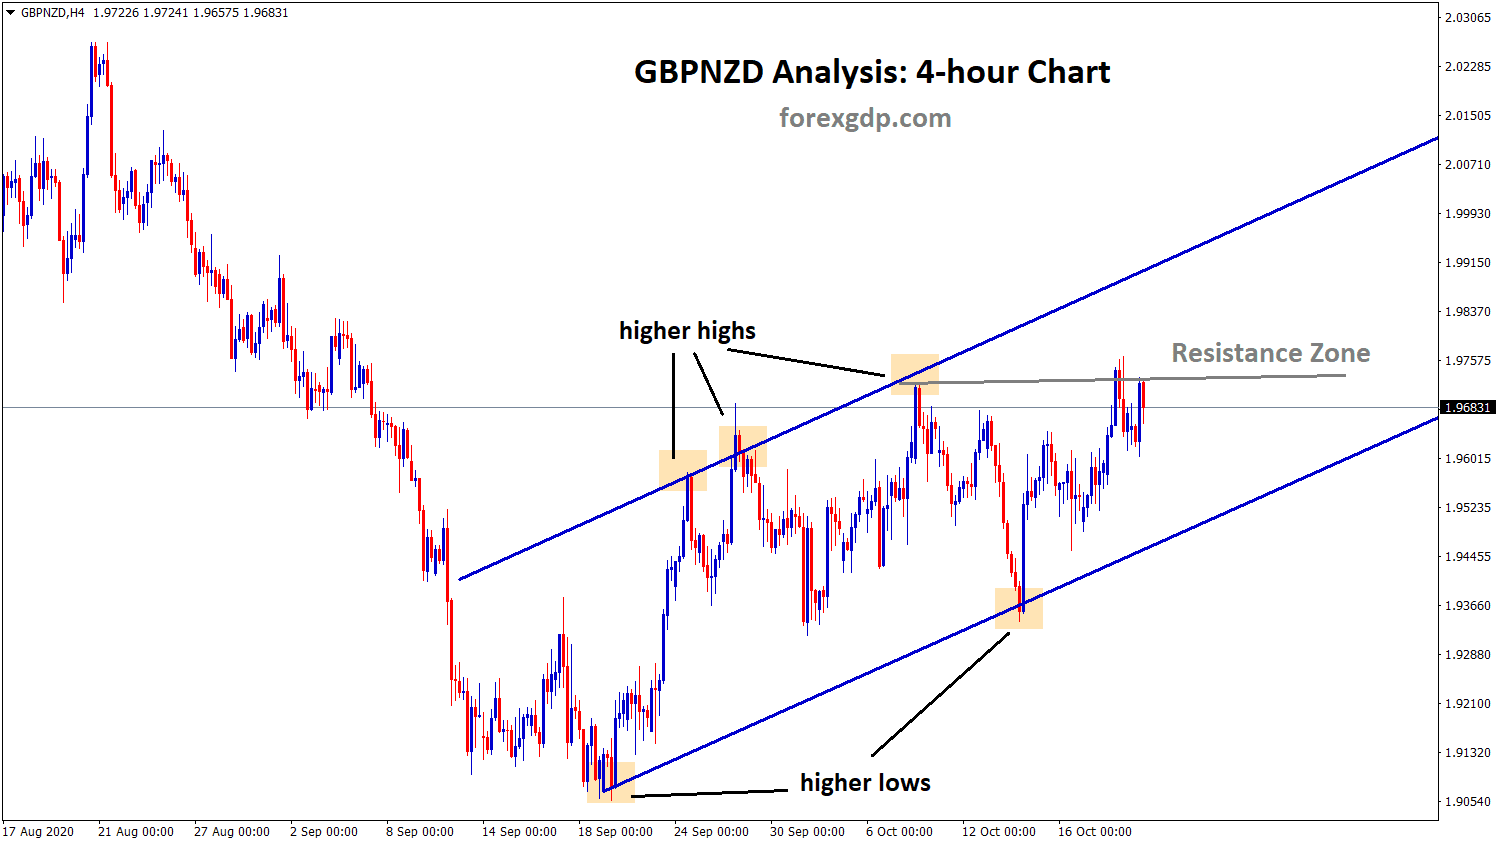 gbpnzd uptrend resistance zone reached